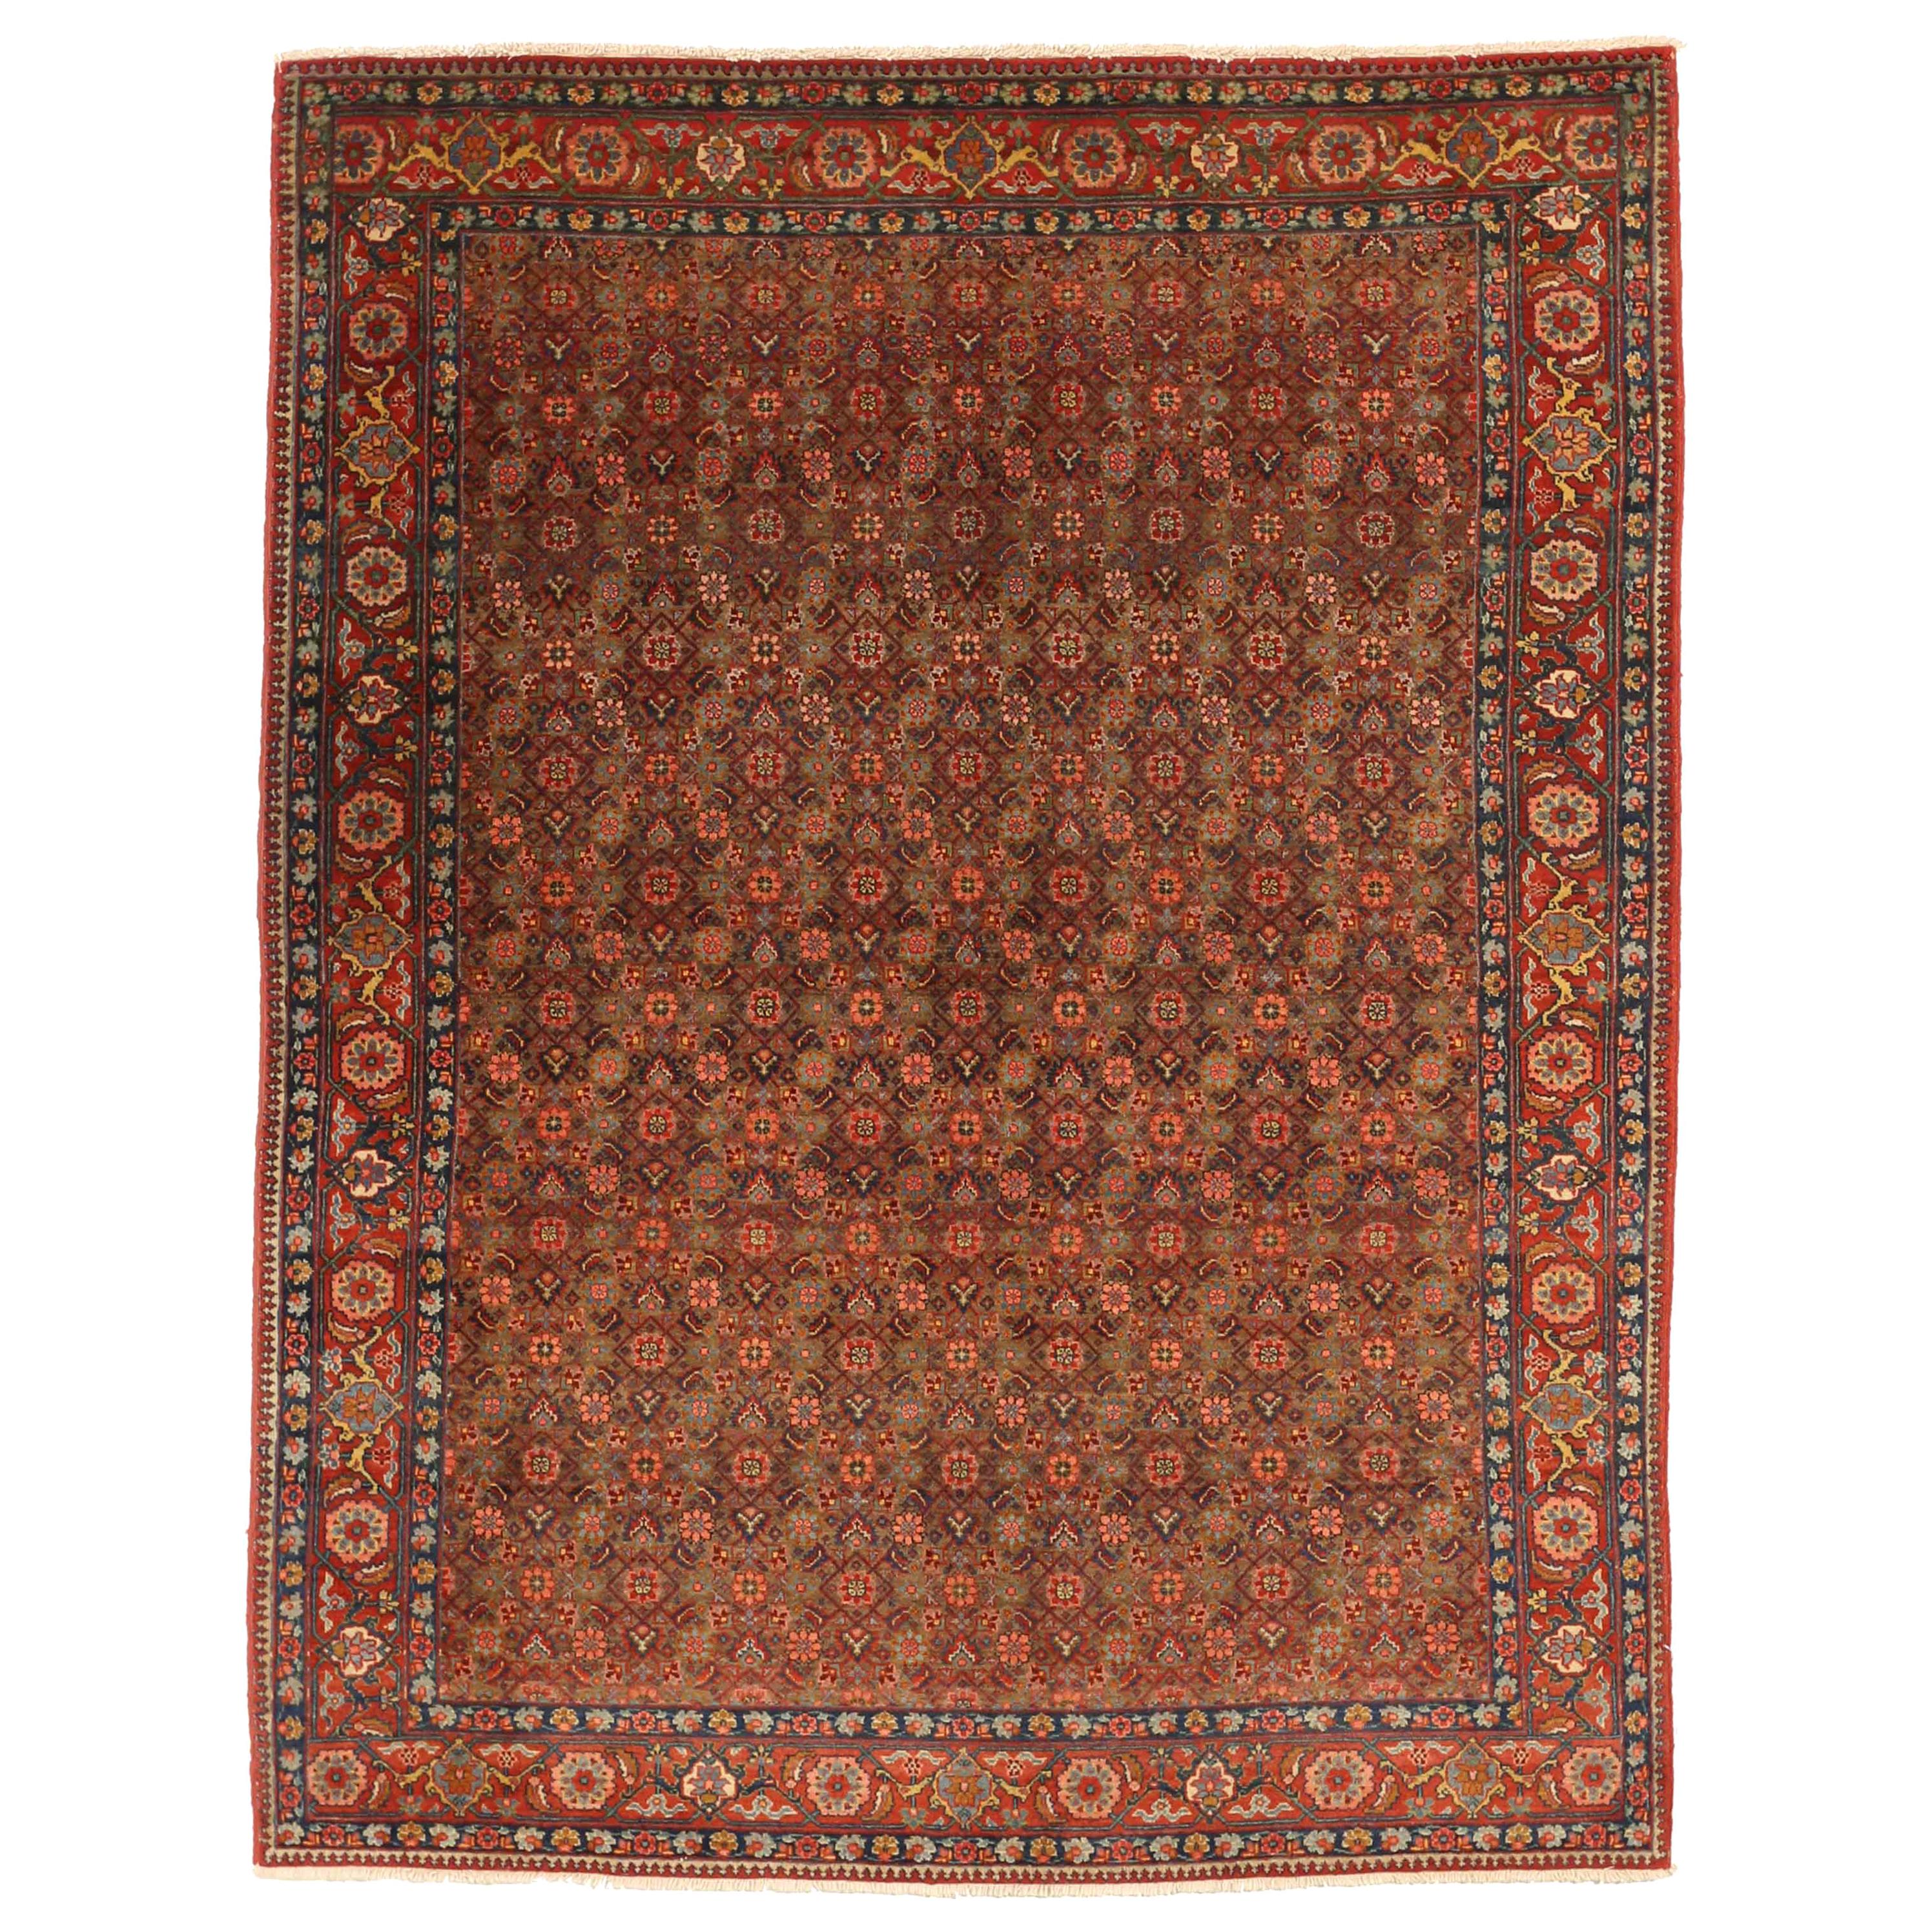 Antique Persian Tabriz Rug with Red and Green Flower Allover Motifs